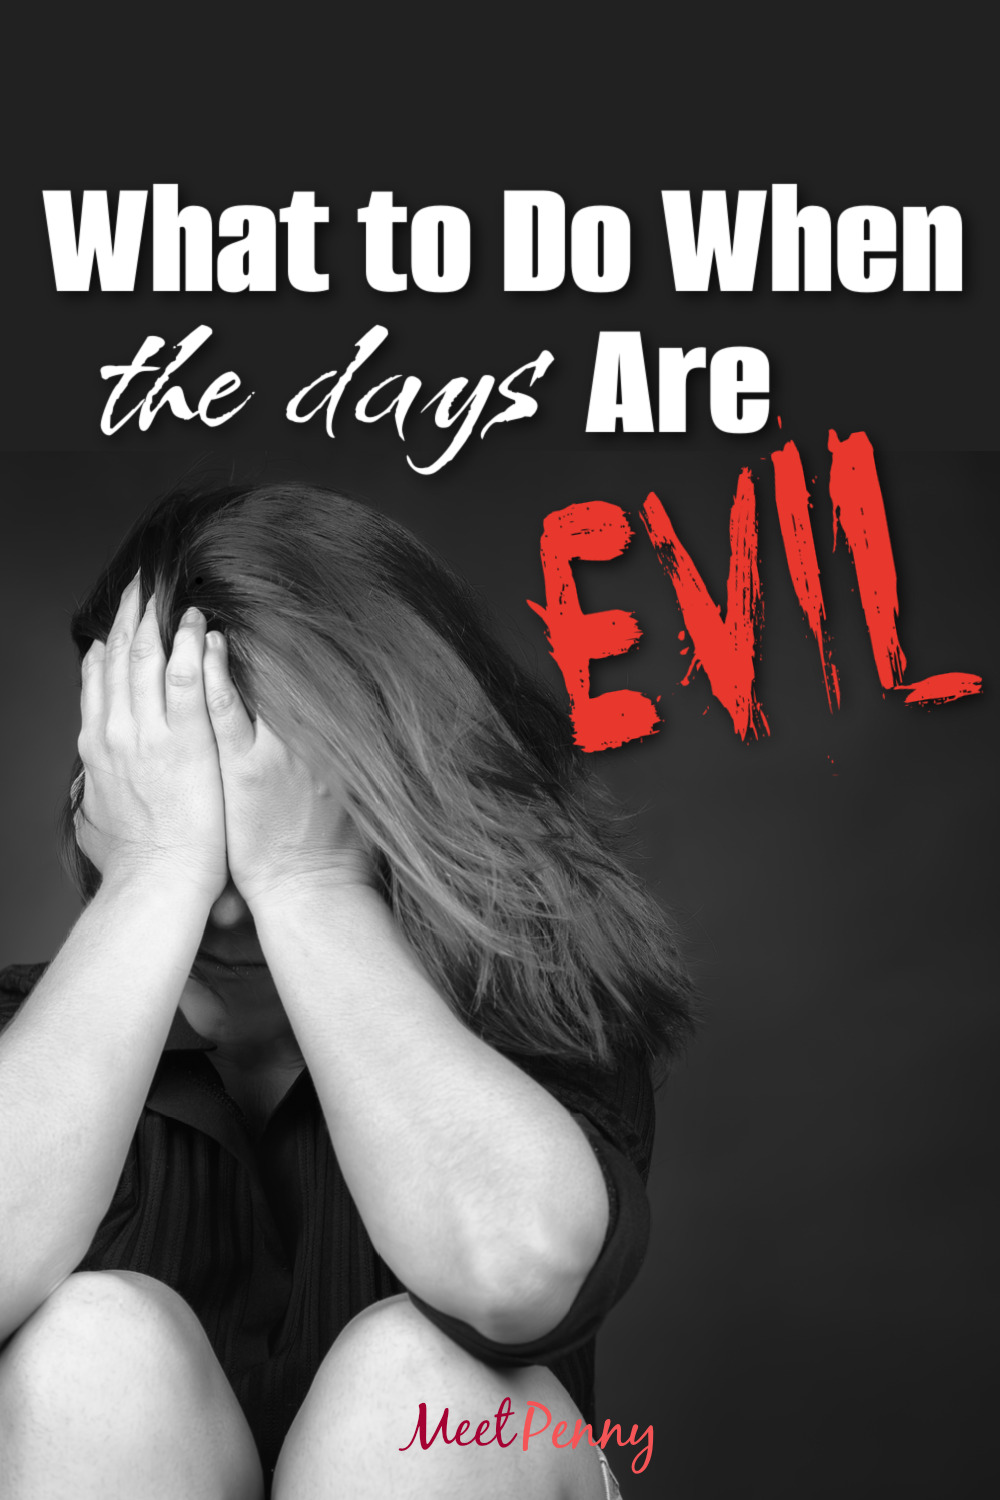 As Christians, how can we respond to evil in our world?